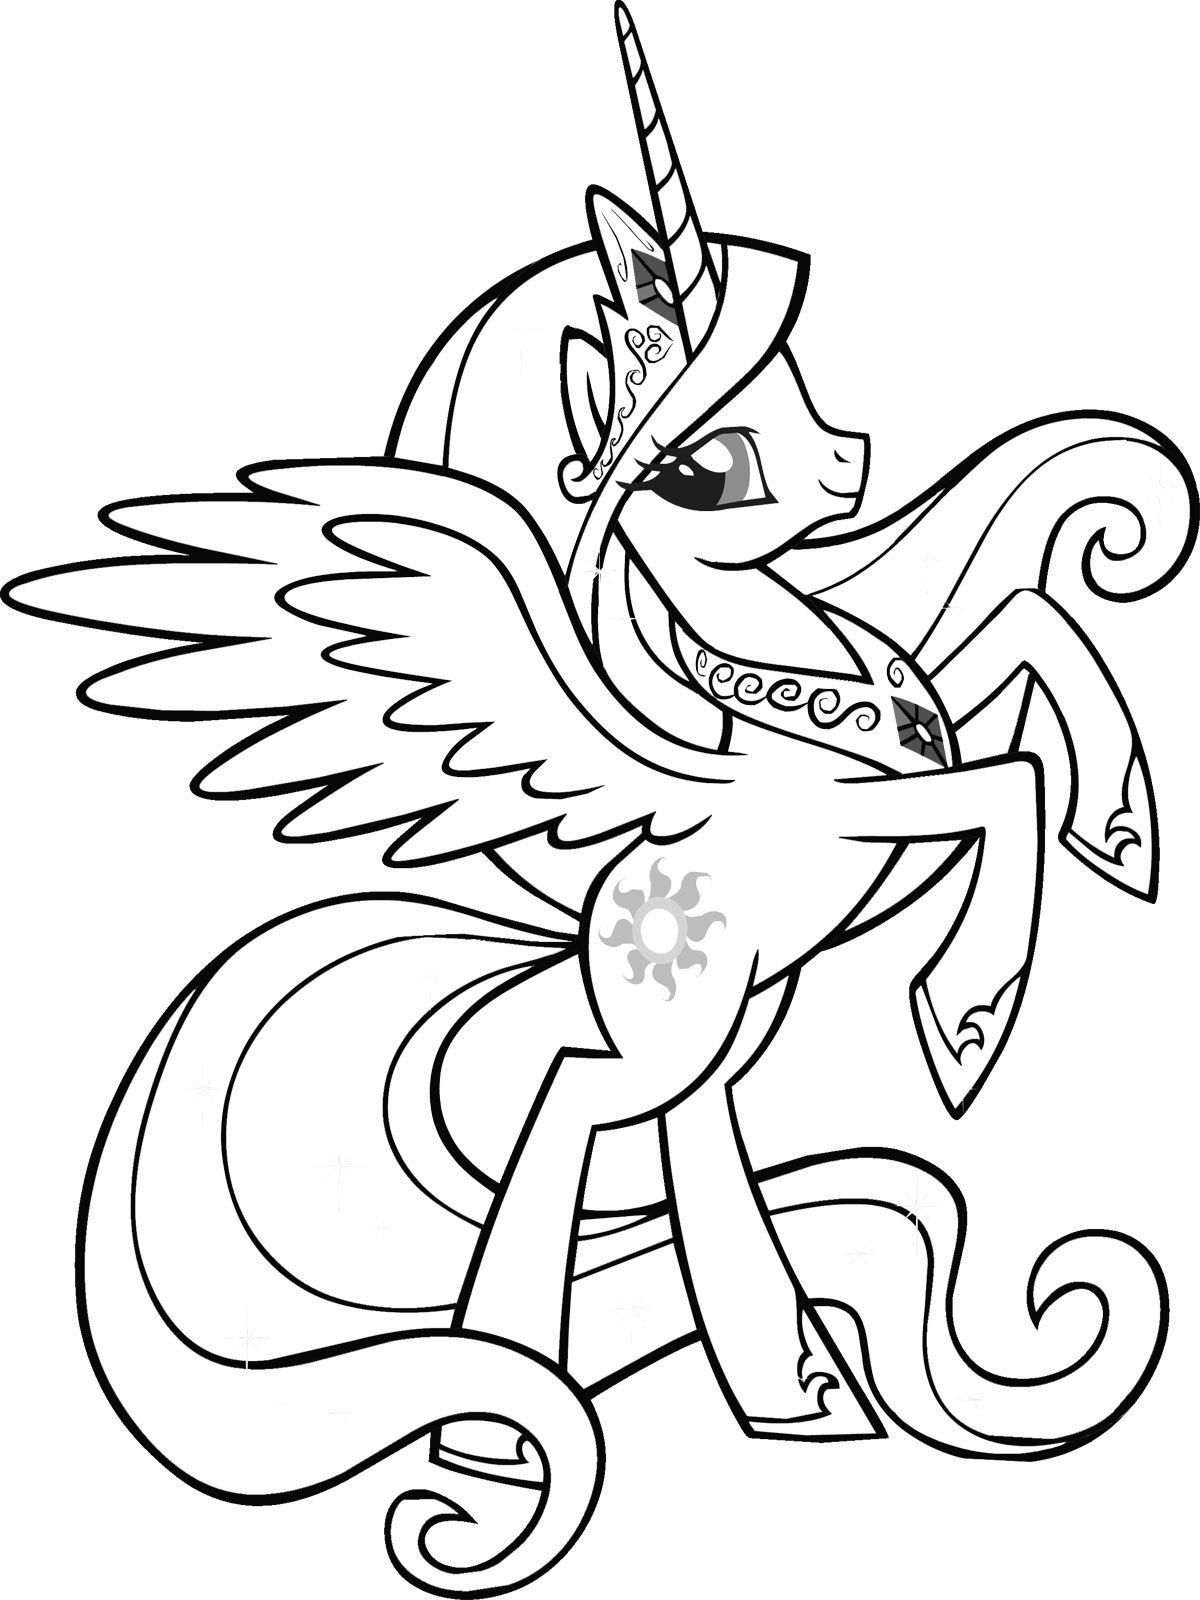 Unicorn Coloring Pages Online My Little Pony Princess Celestia Coloring Page My Little Pony